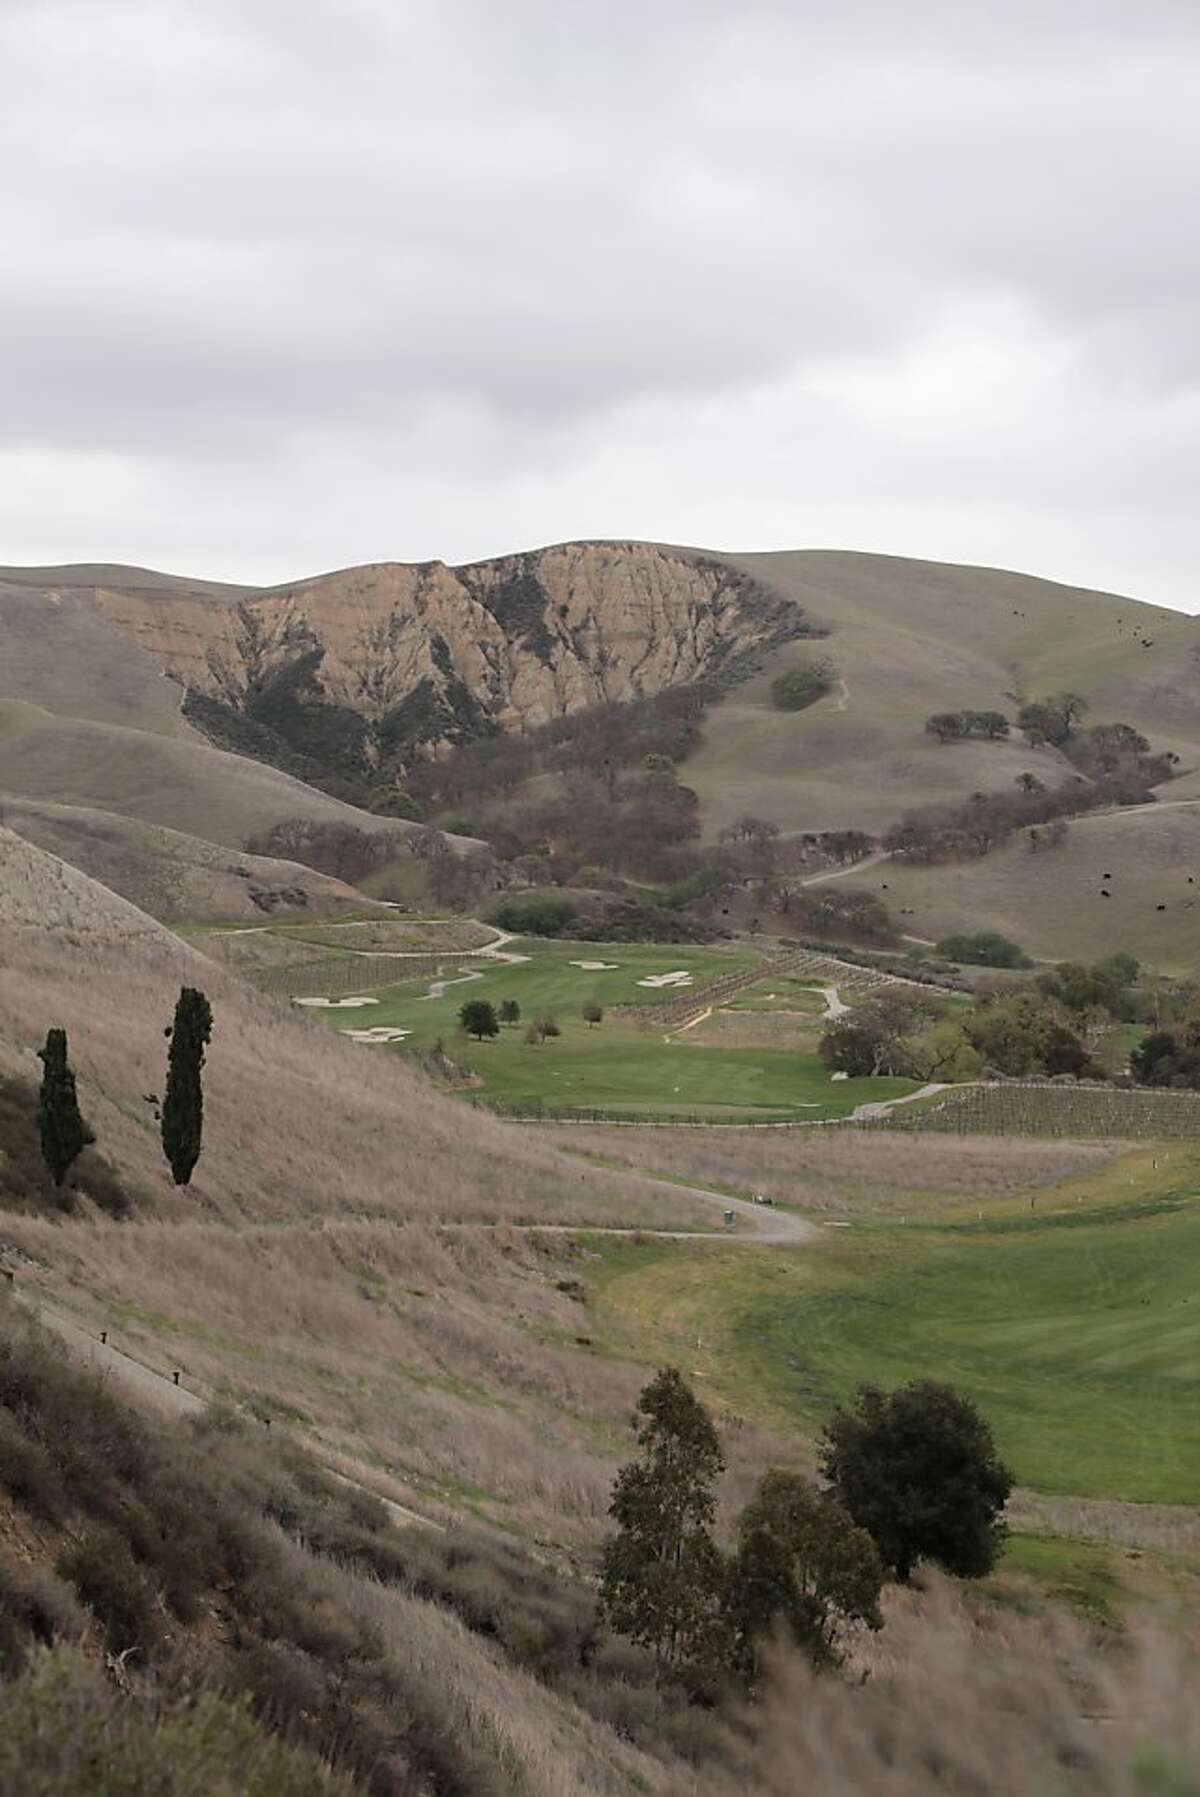 Landscape showing the "Cresta Blanca" - a design used on Wente's wine bottles - at Wente Vineyards in Livermore, California on March 16, 2012.